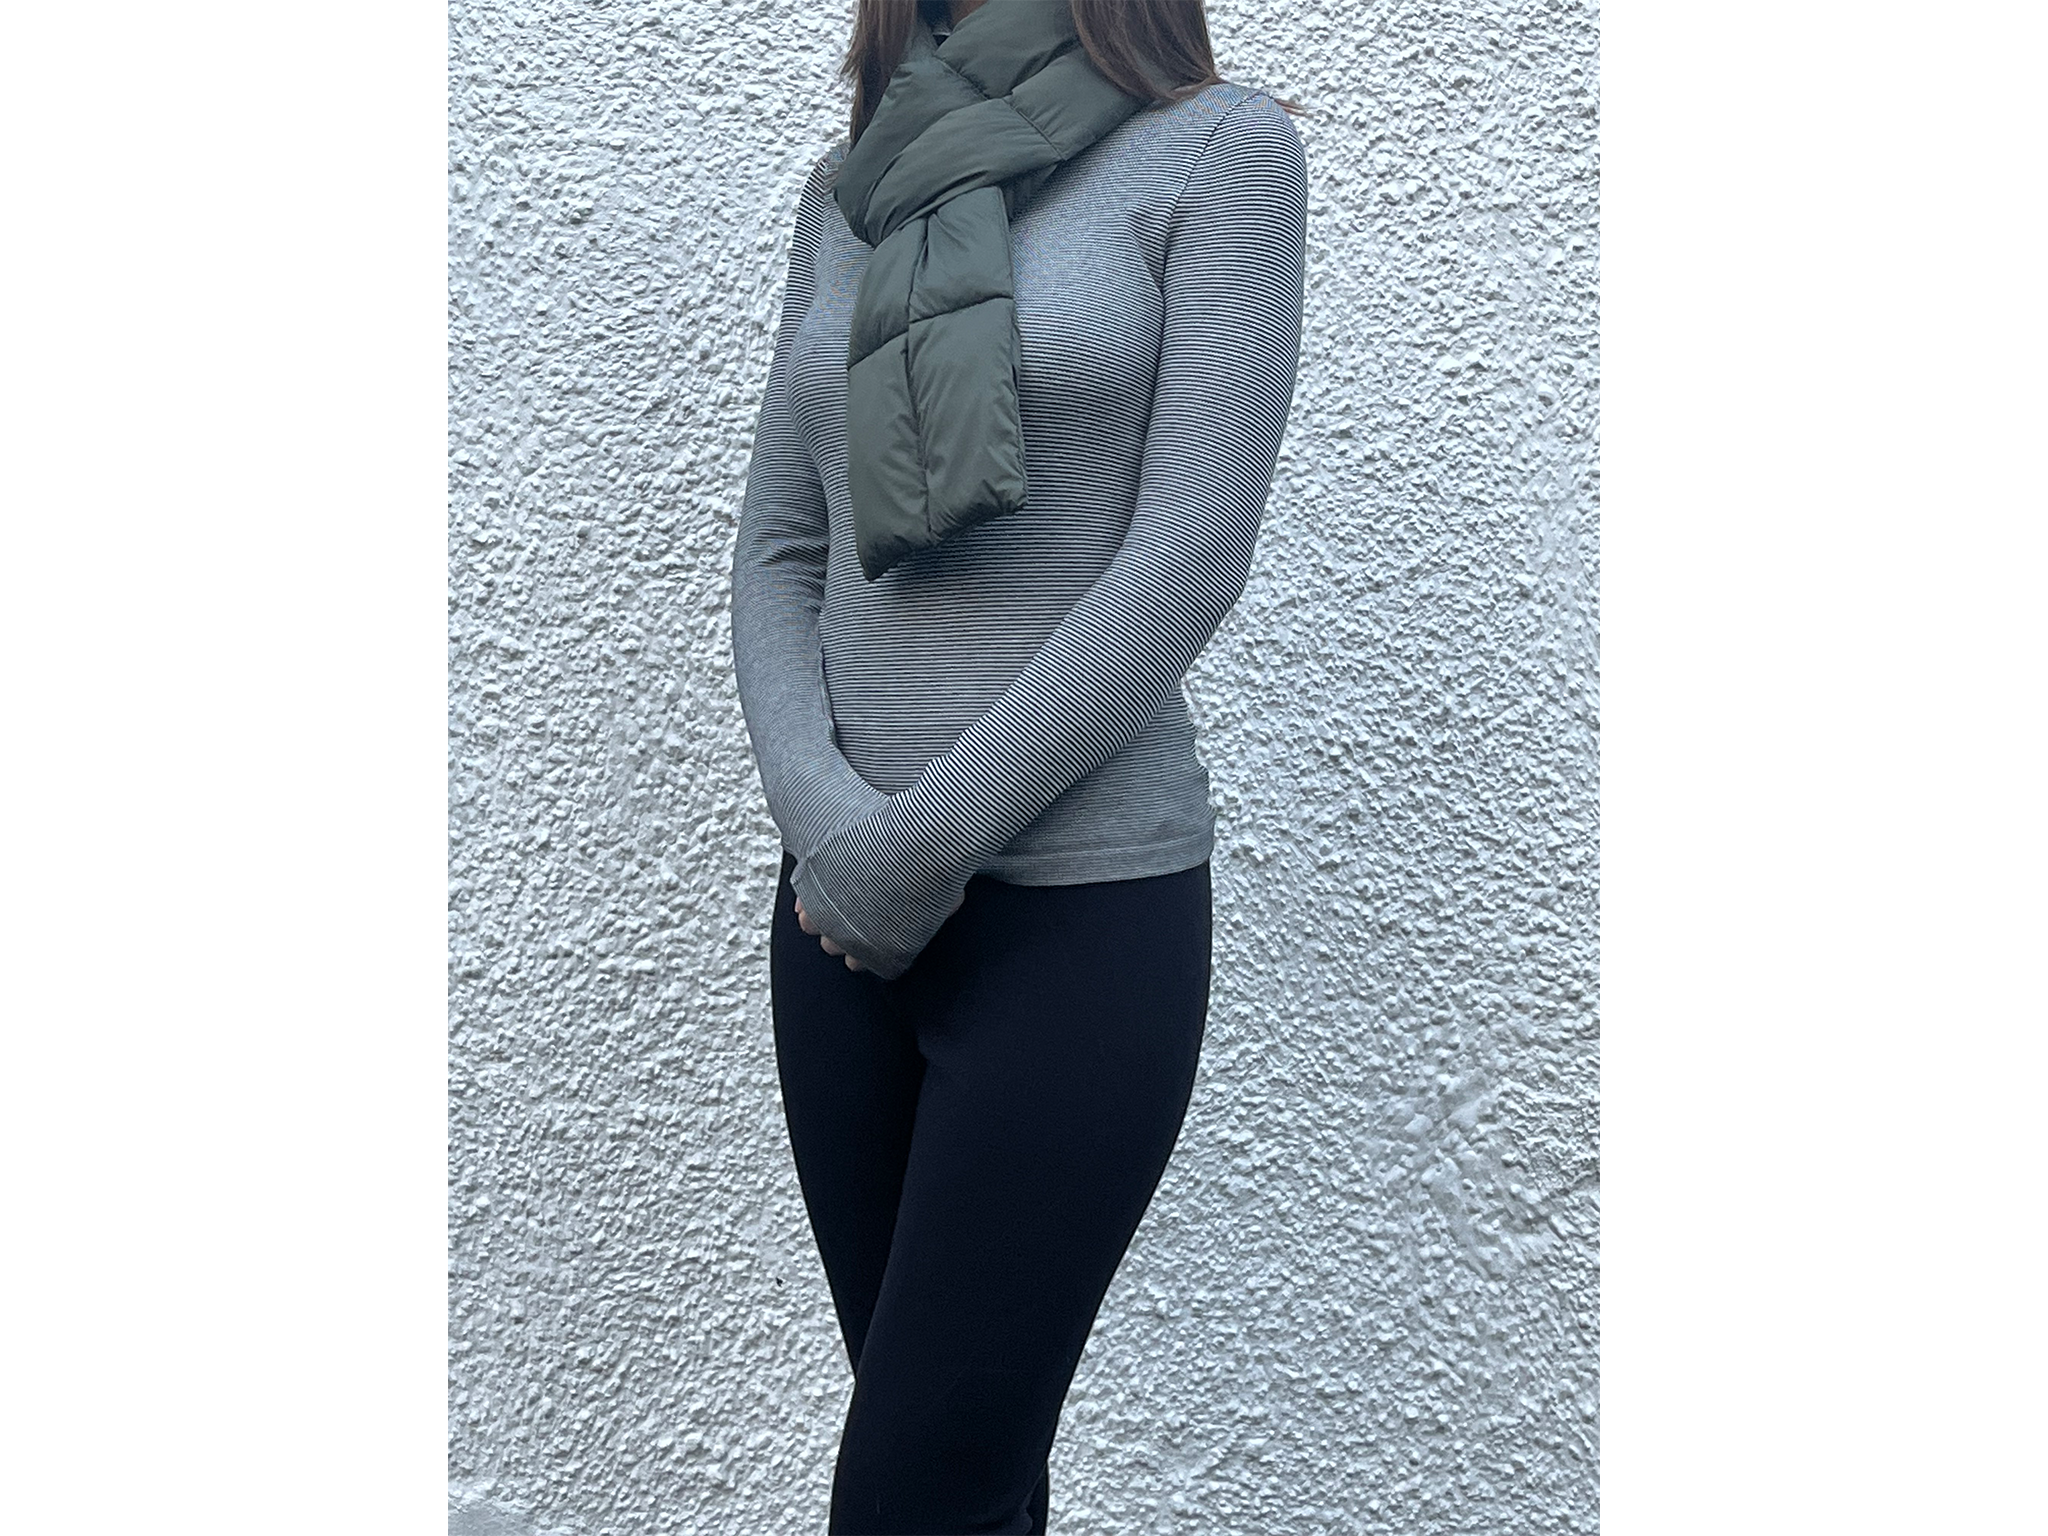 The extra warm turtleneck, ultra warm leggings and padded scarf were among the items we tested